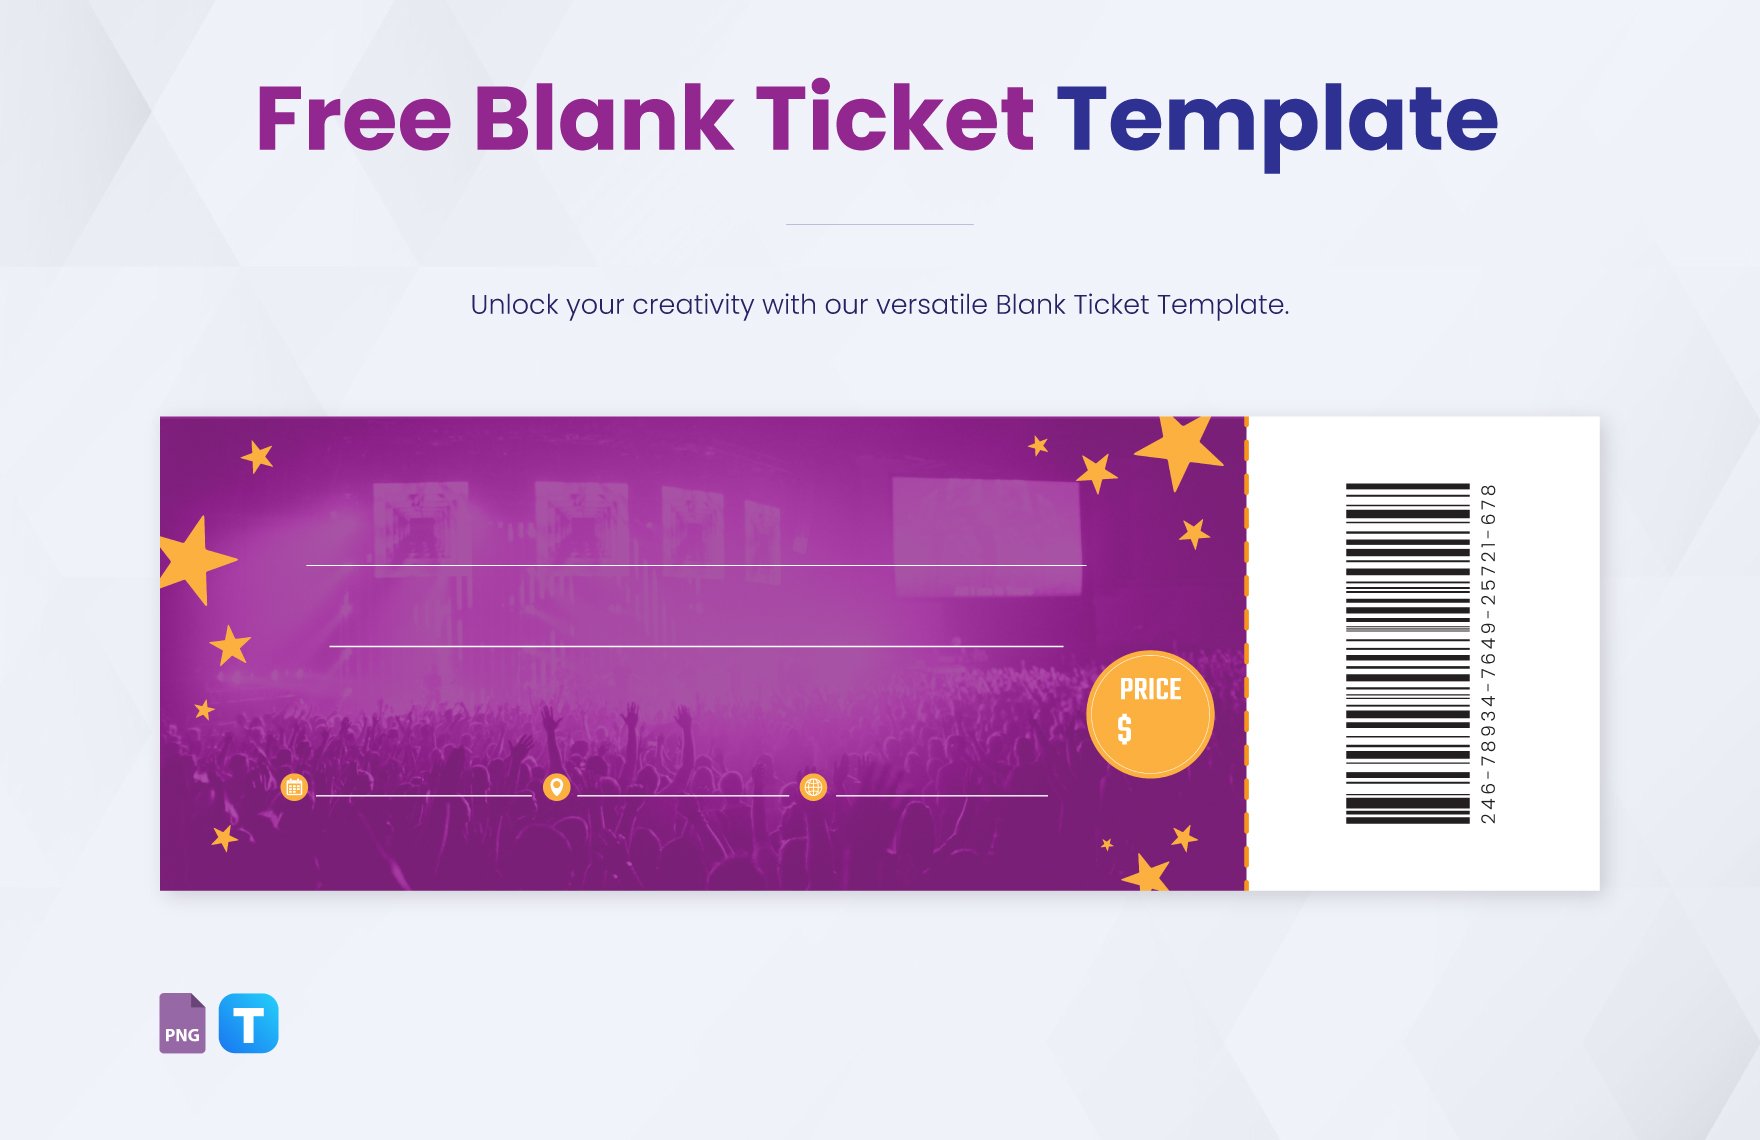 free-blank-ticket-template-download-in-png-template